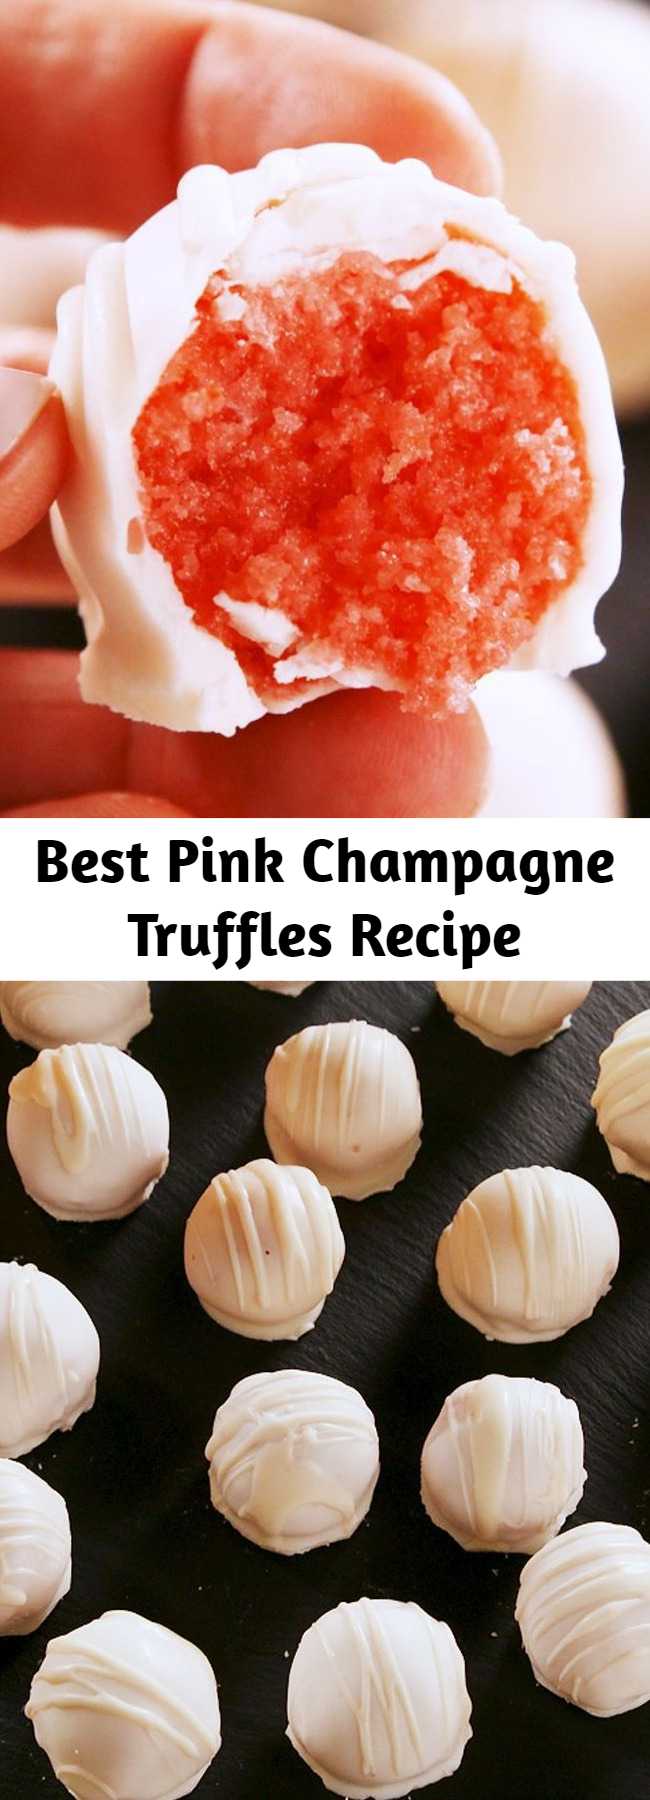 Best Pink Champagne Truffles Recipe - These pretty truffles start with the coolest cake mix hack. You whisk champagne into the batter. Don't worry, not all the booze bakes off—there's also a little bubbly in the frosting.